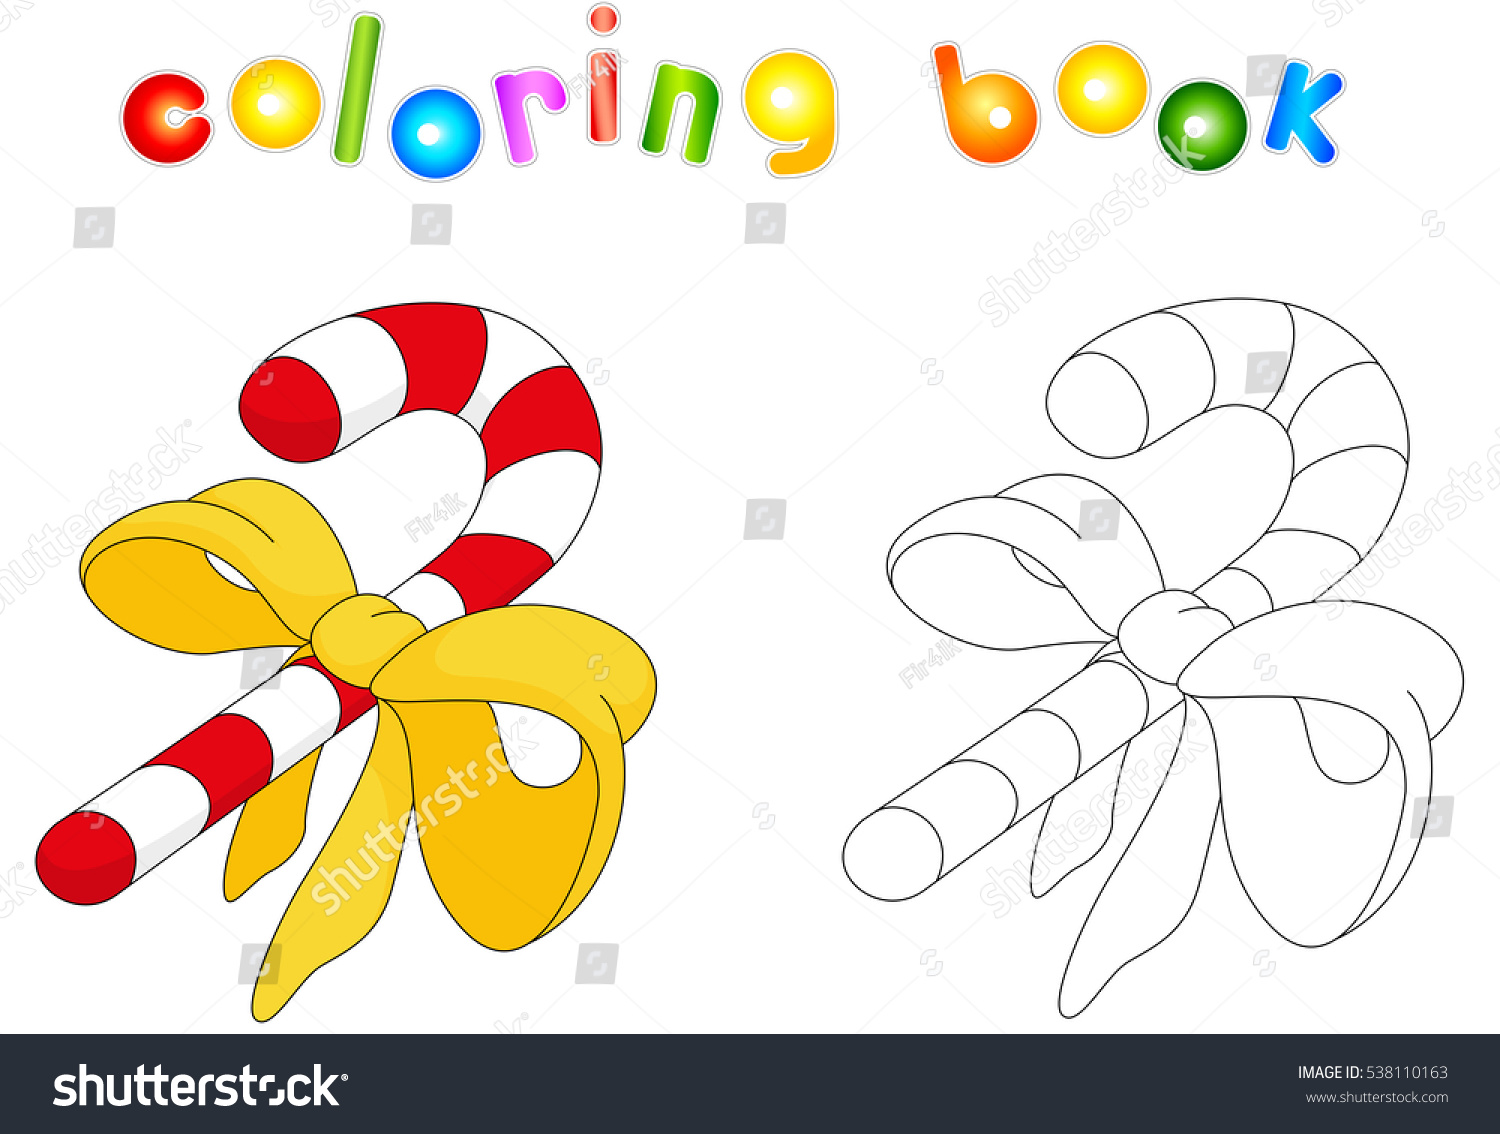 Christmas Candy Cane Coloring Book Kids Stock Vector Royalty Free 538110163